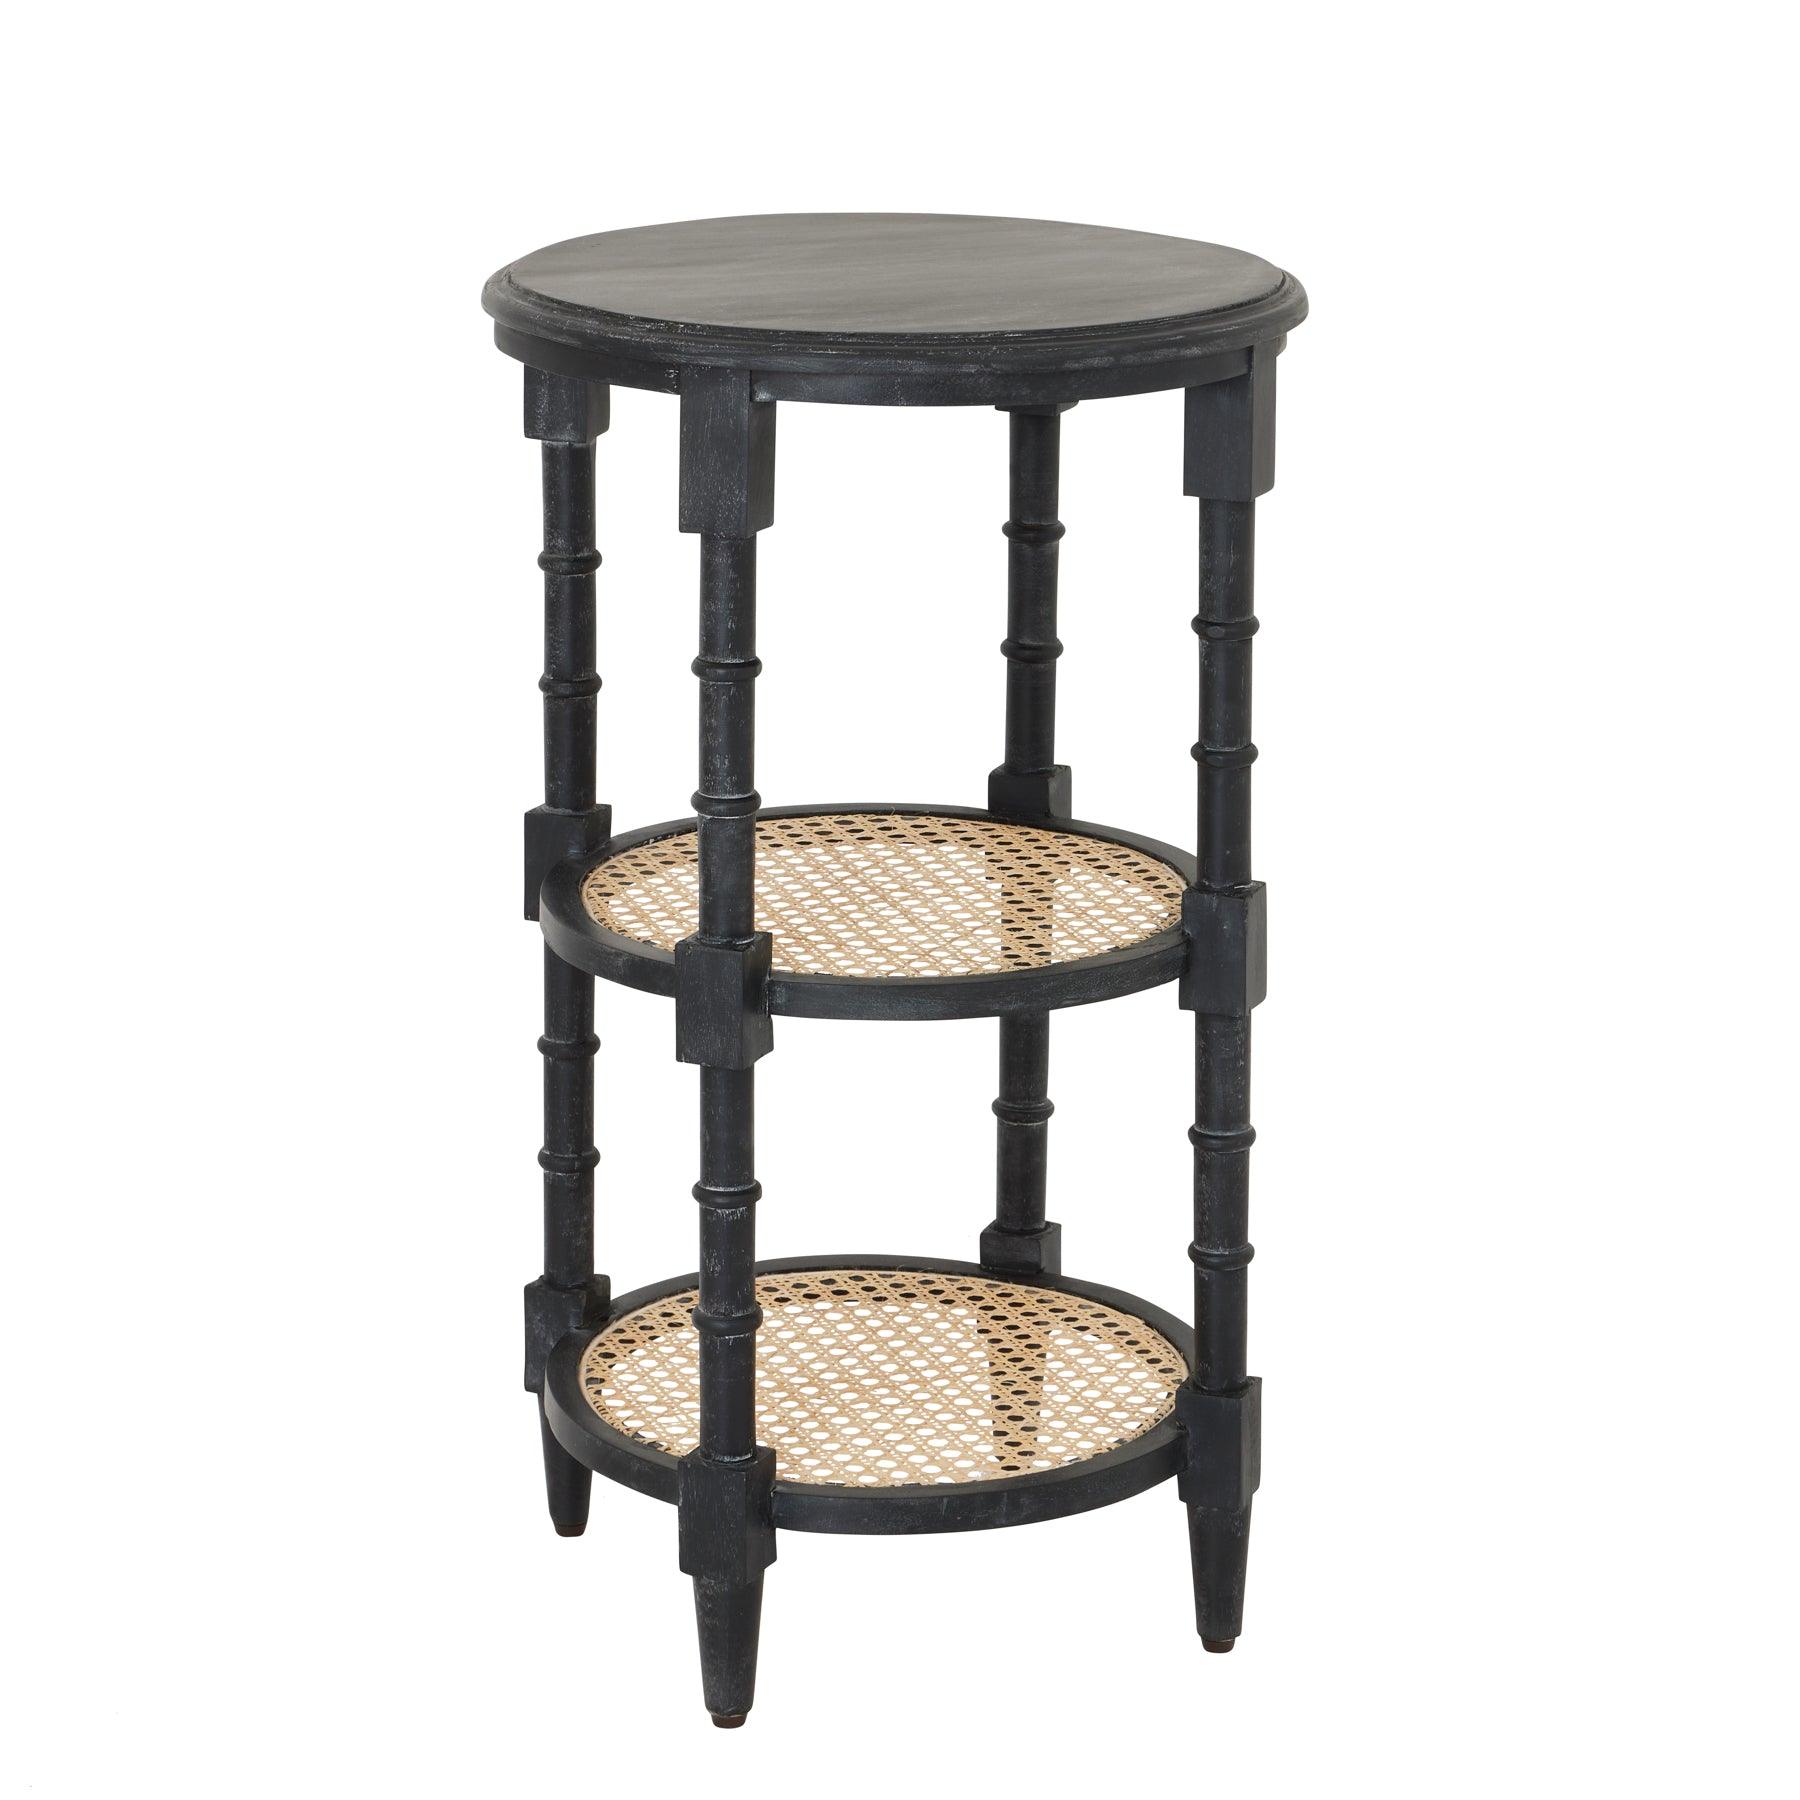 View Raffles Black Tall Round Side Table information